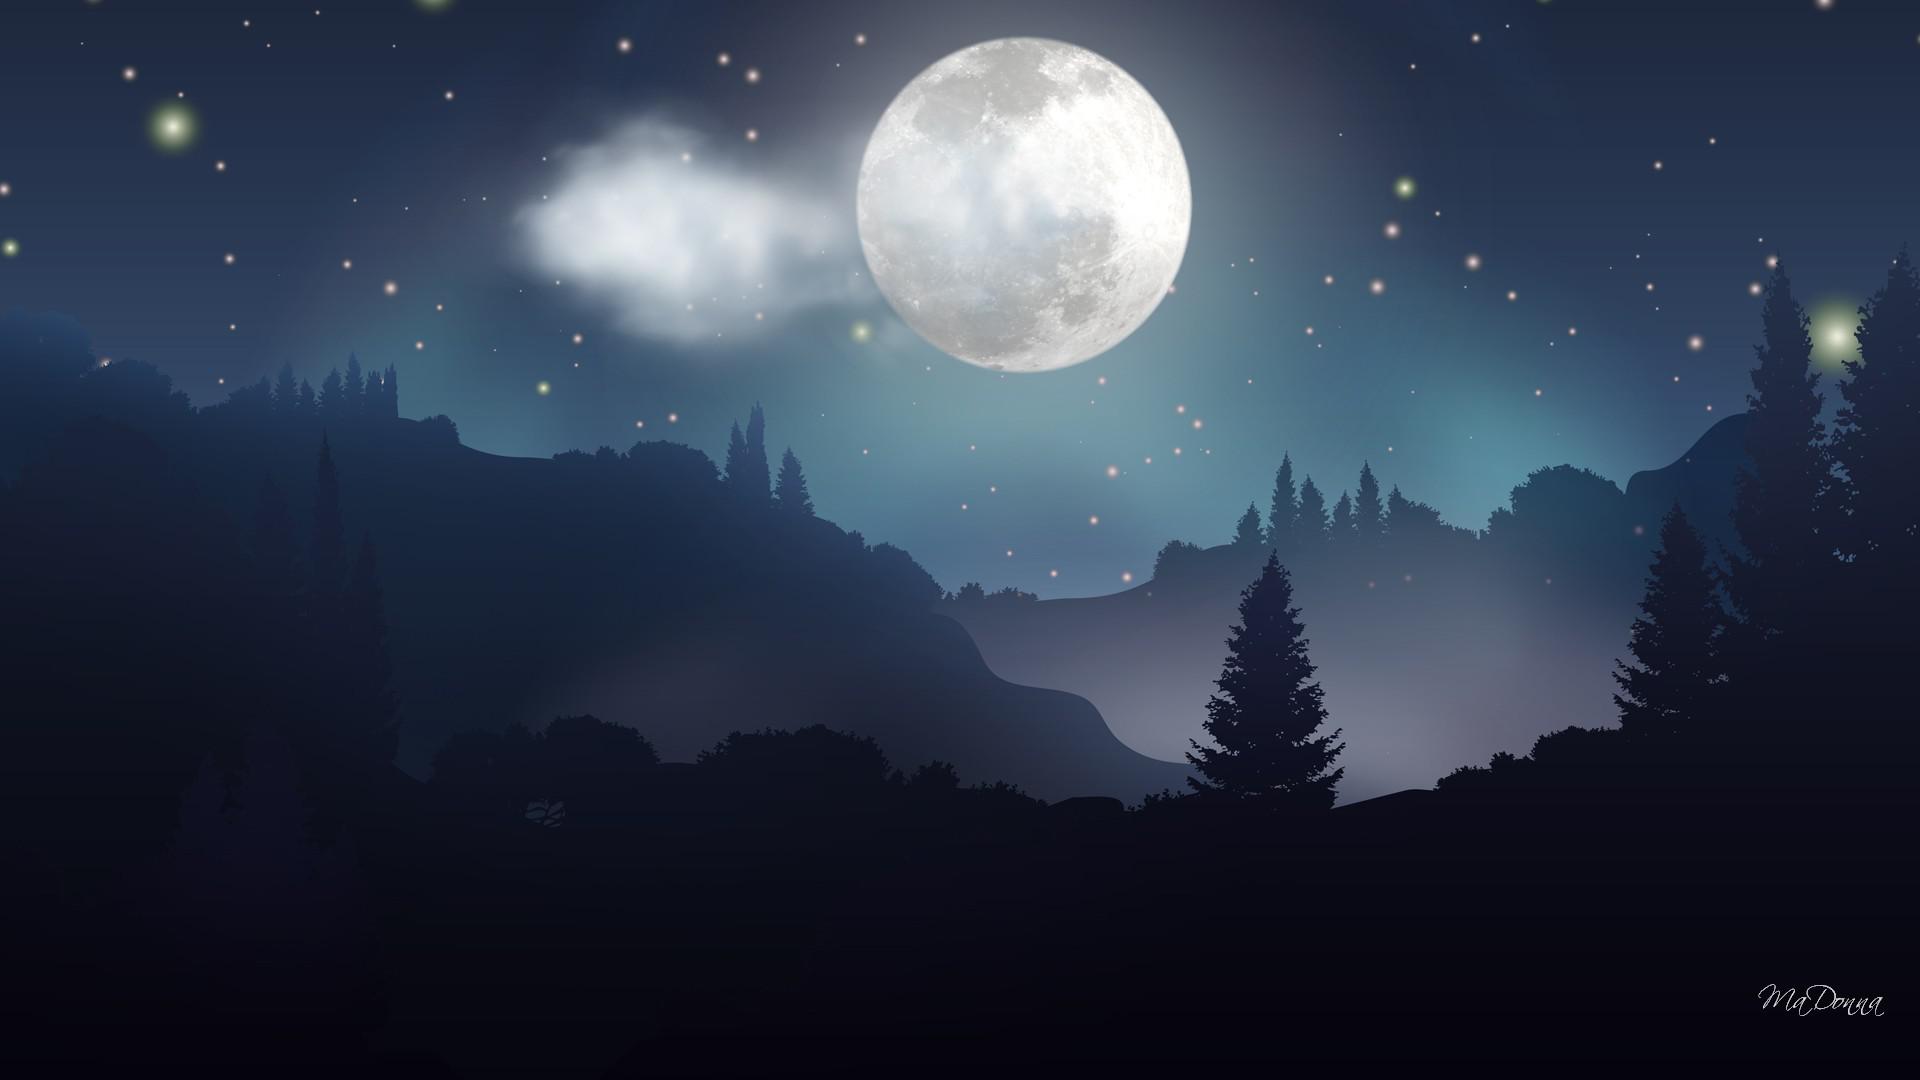 Free Download Moonlight Wallpaper Image Size 1920x1080px Moonlight Images, Photos, Reviews